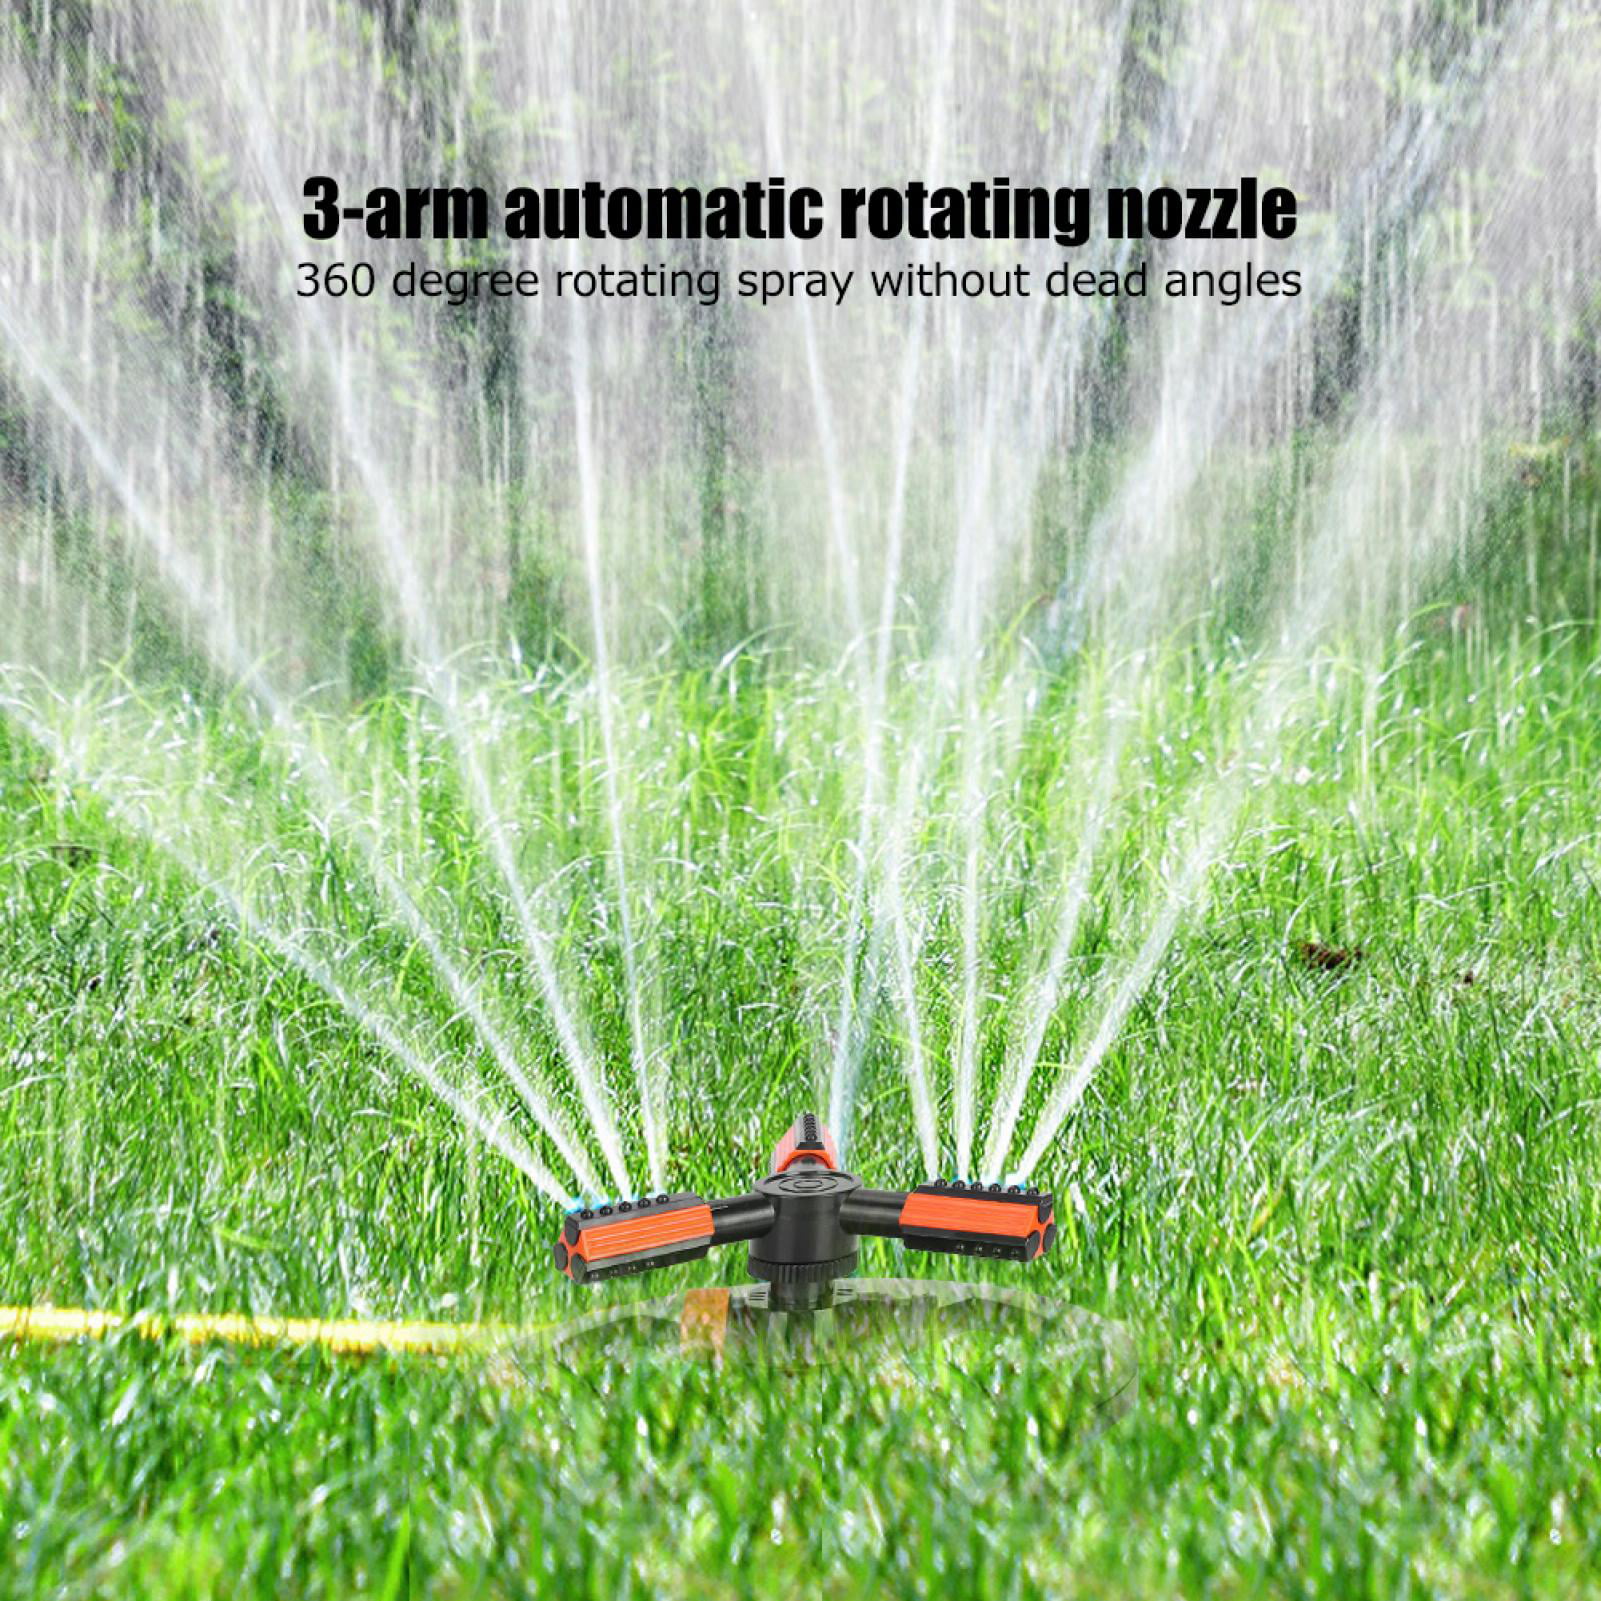 Details about   Auto 360 Rotating Garden Lawn Water Sprinklers Sprayer Irrigation 3-Arms System 